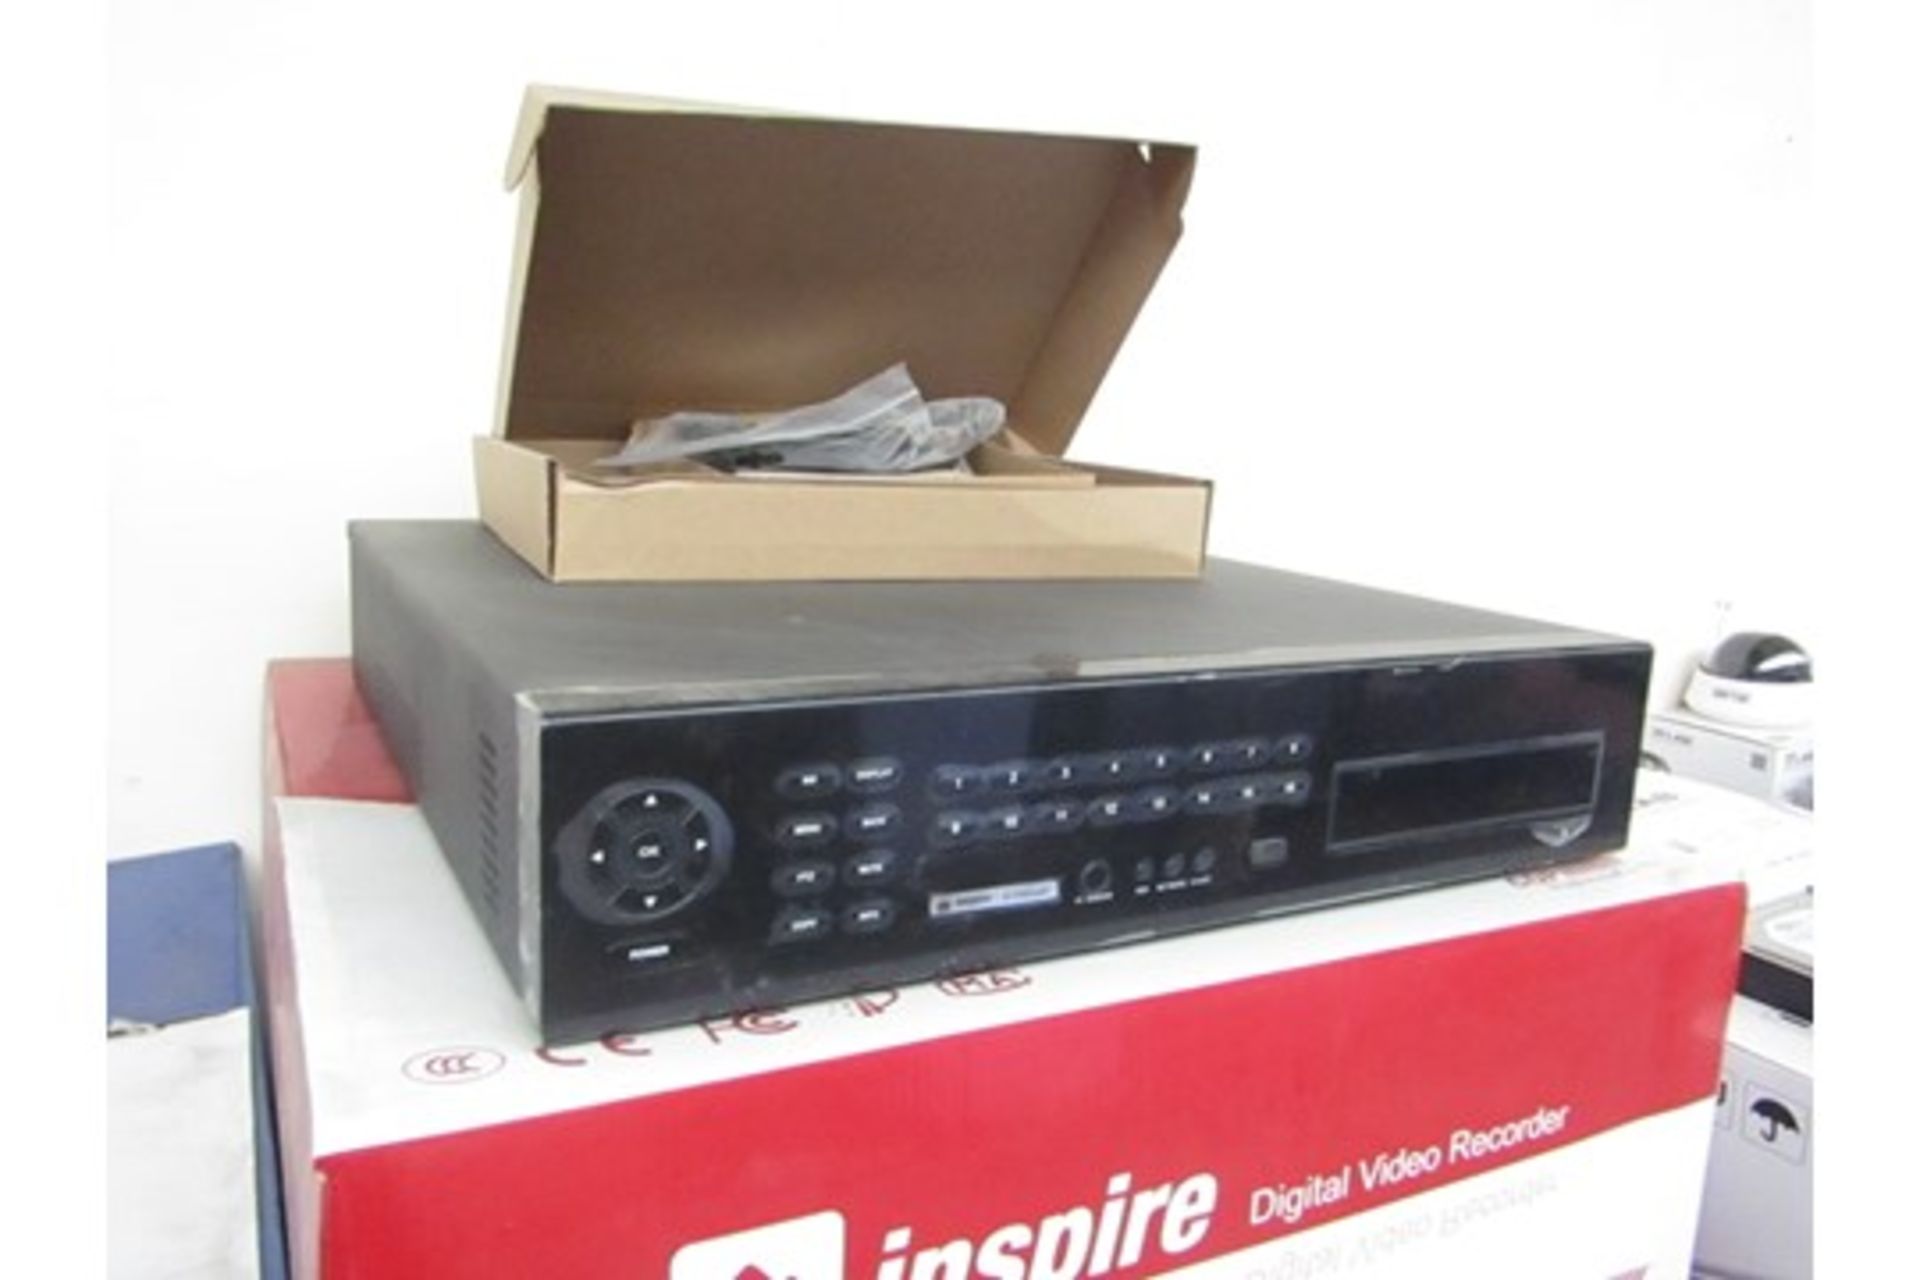 Full high end professional CCTV camera system!Contains:Cop Security Inspire 8 channel digital - Image 2 of 2